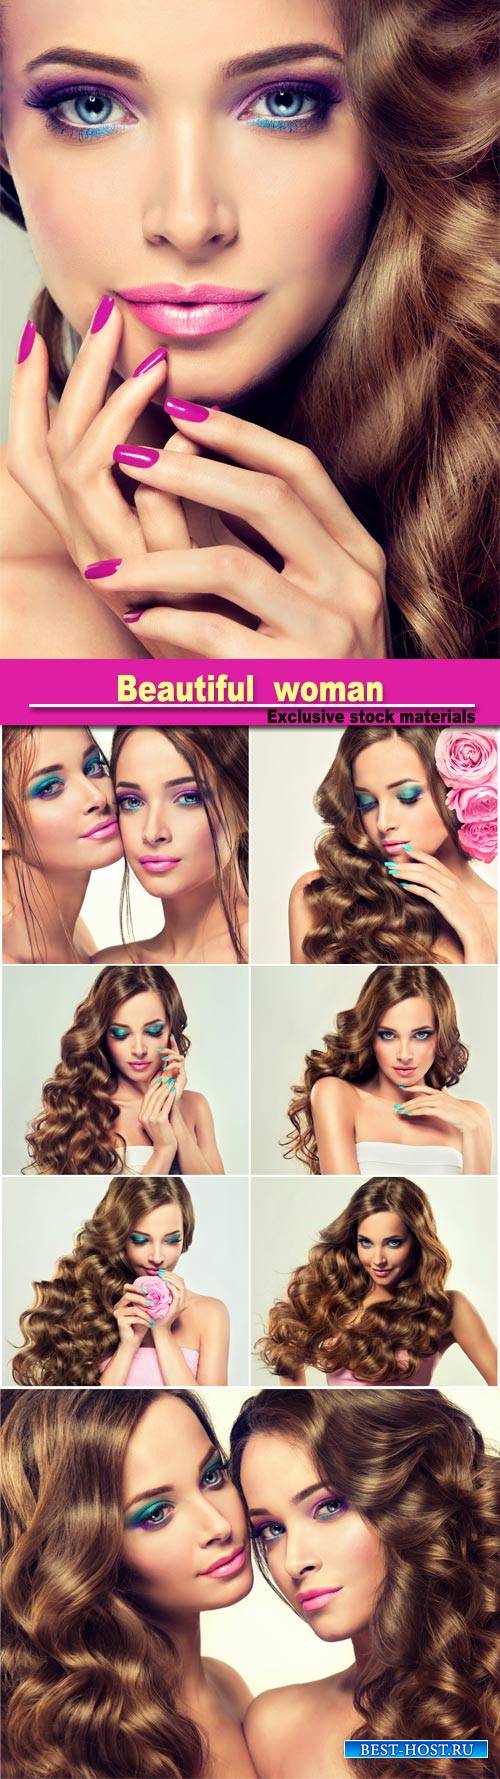 Portrait of young models, with lush hair, perfect violet makeup and pink ma ...